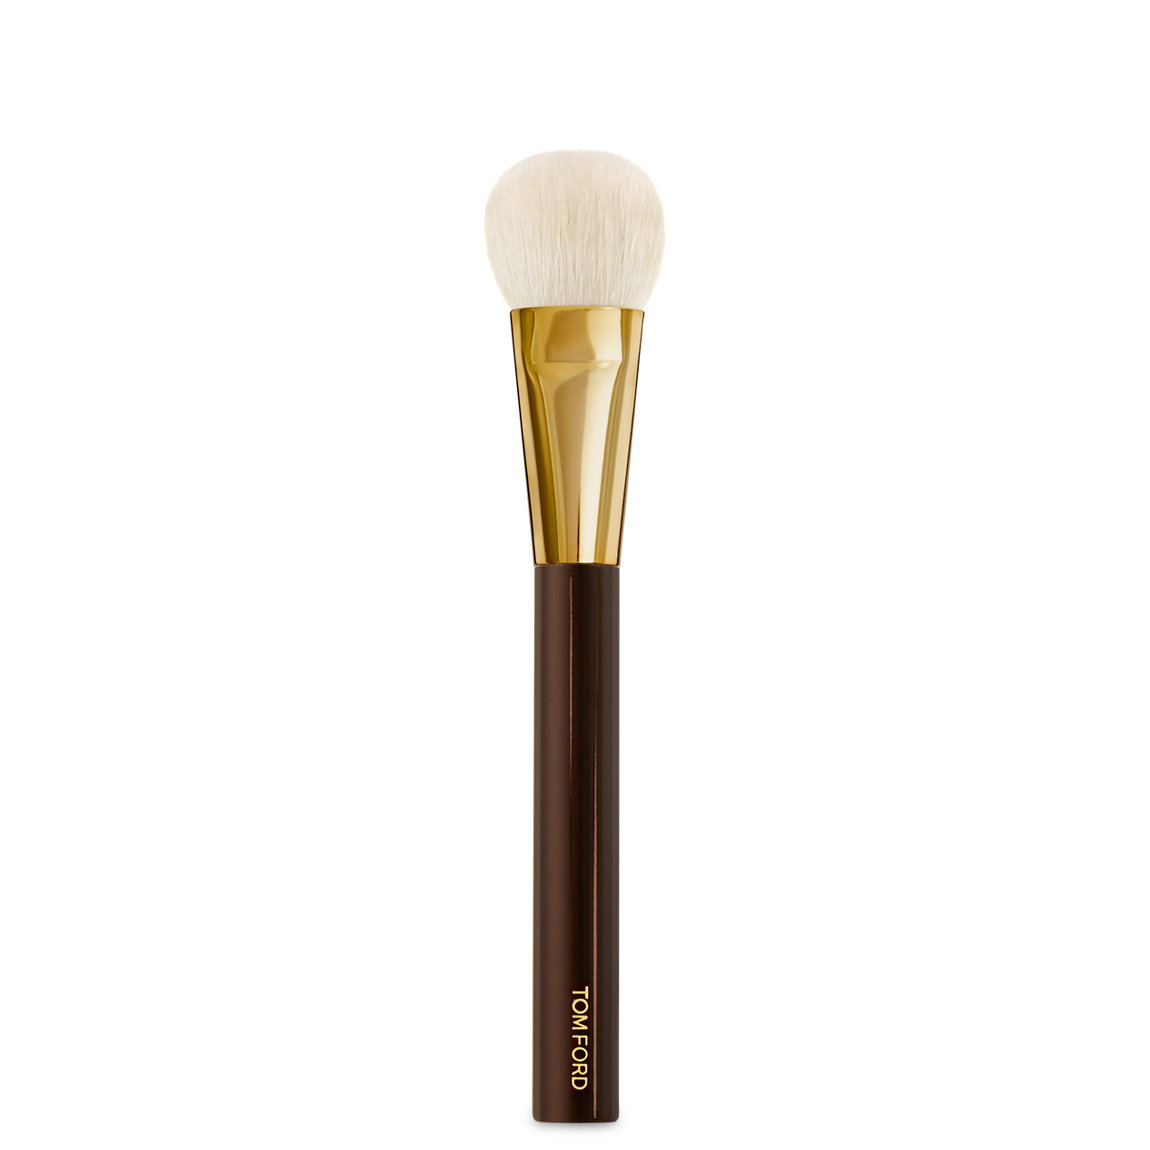 TOM FORD Cream Foundation Brush 02 alternative view 1 - product swatch.